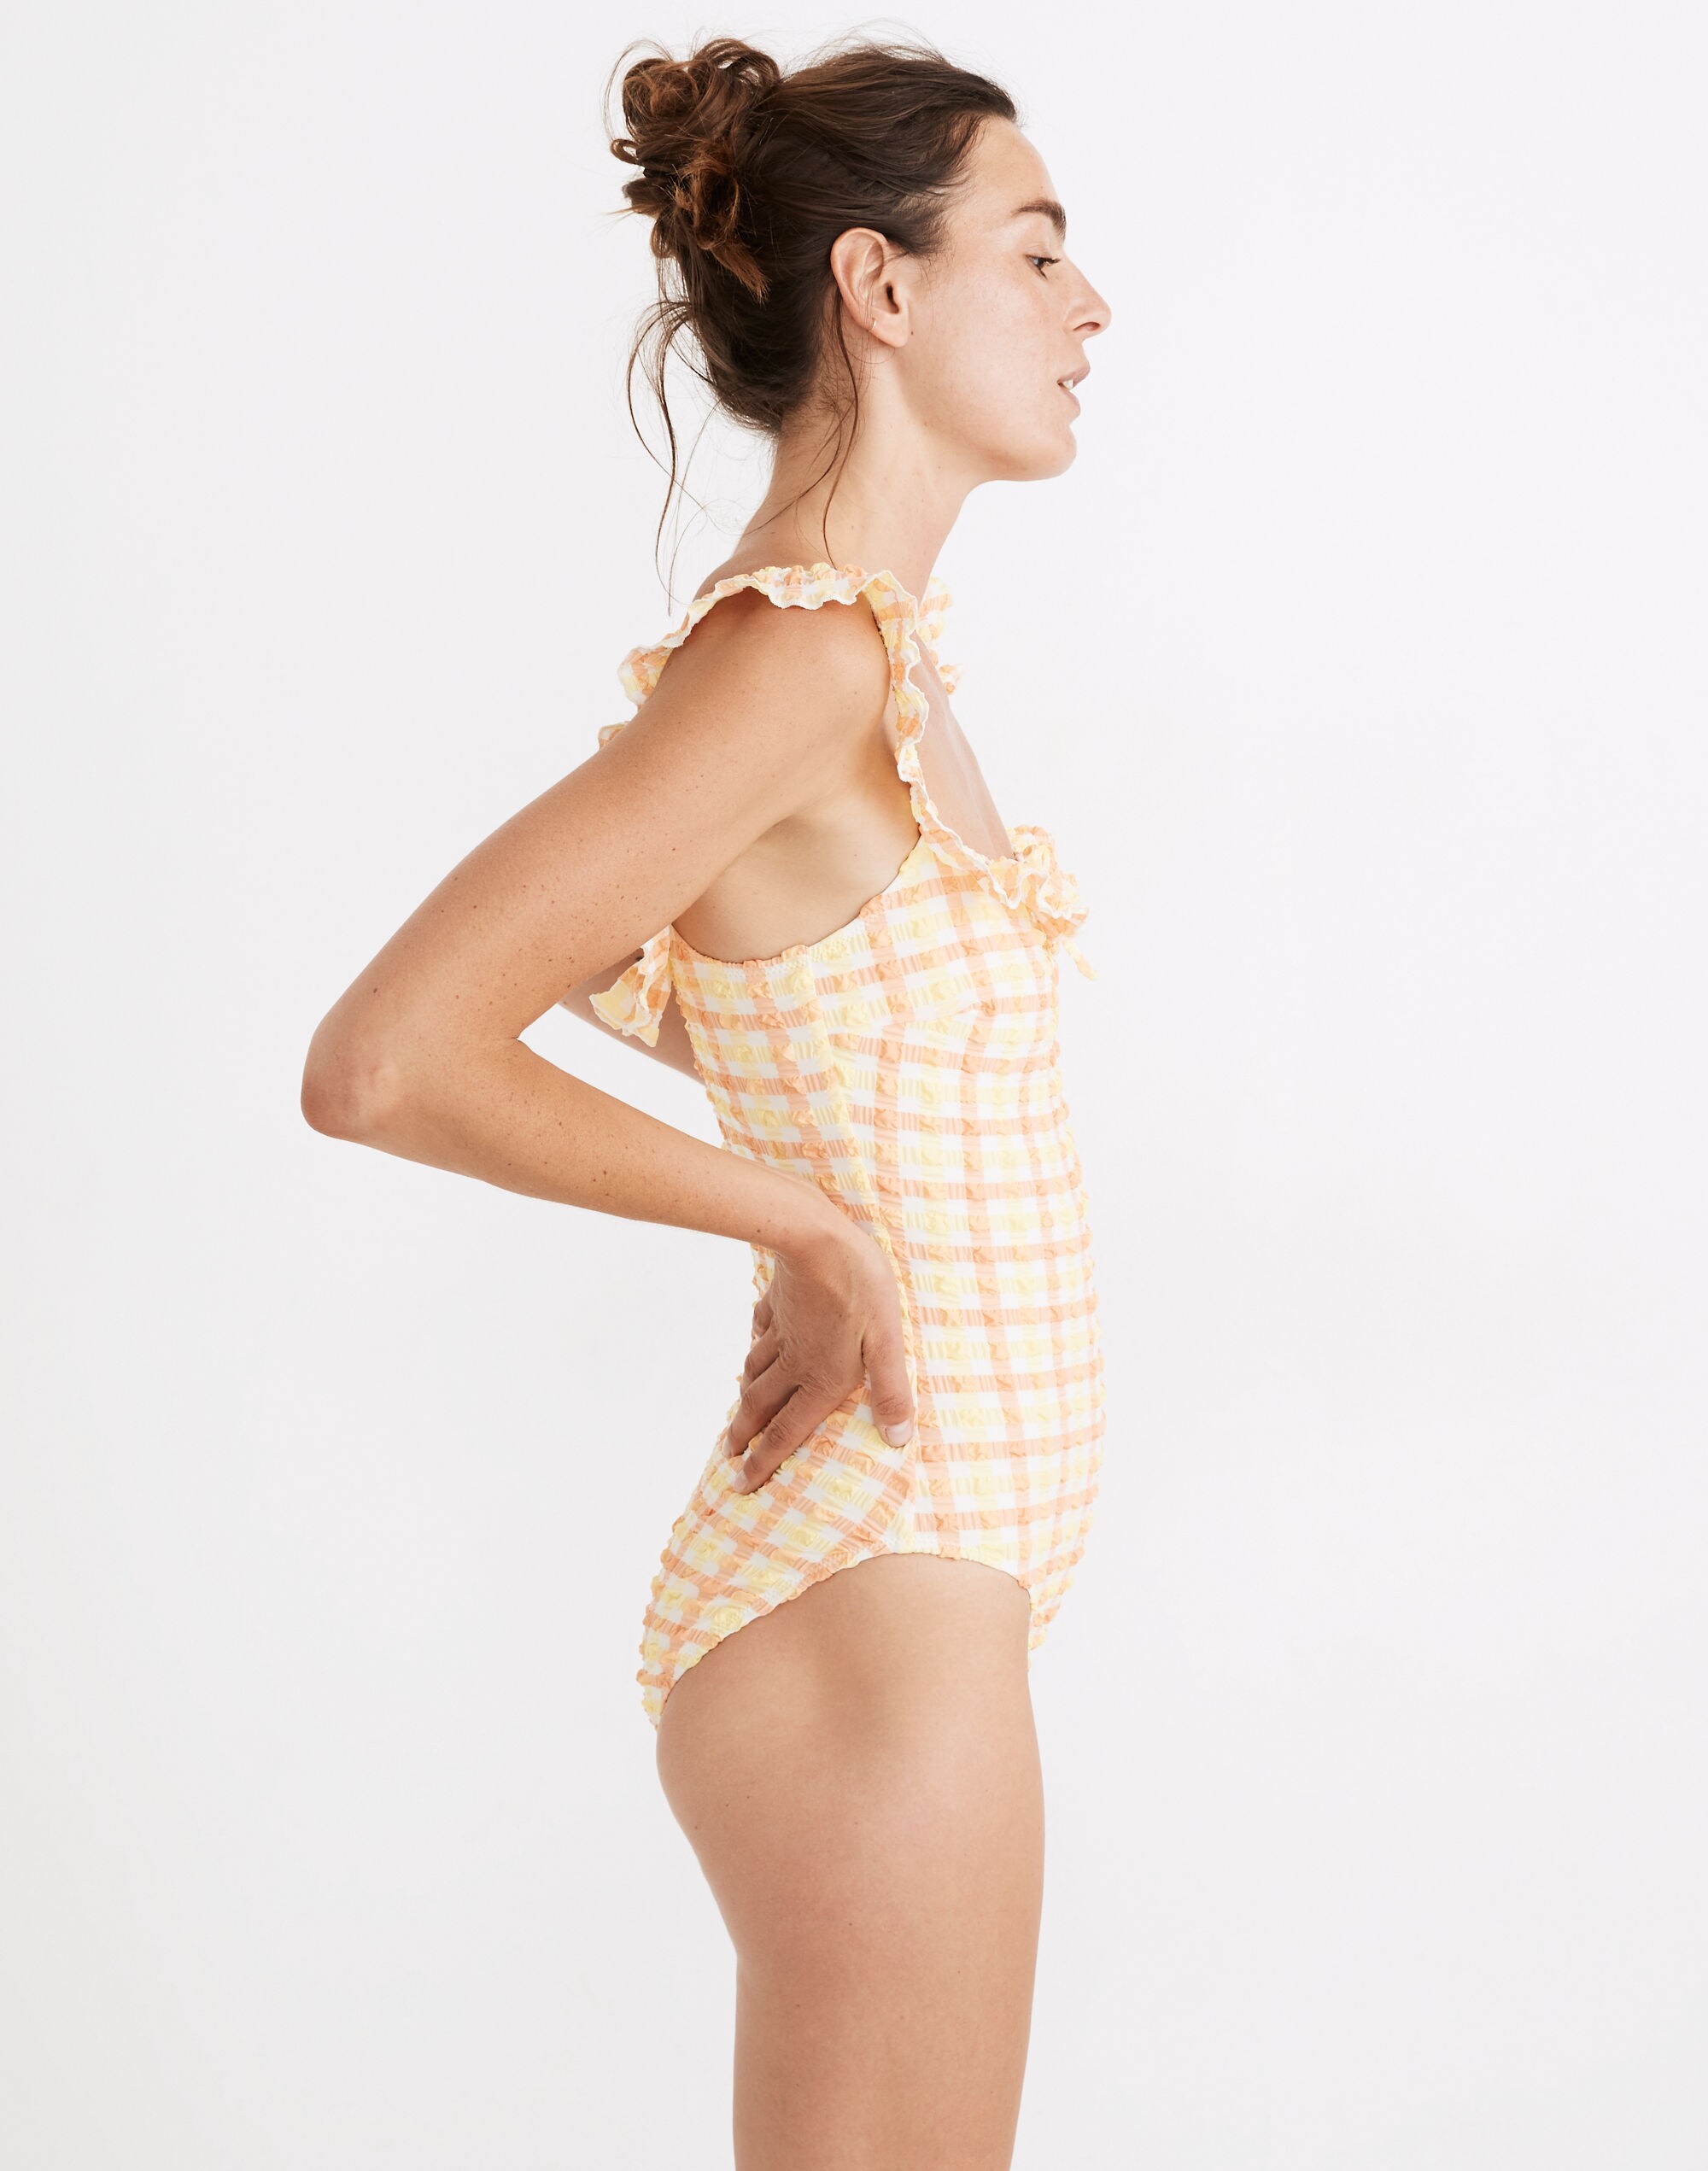 Madewell x Solid & Striped® Amelia One-Piece Swimsuit in Seersucker Gingham